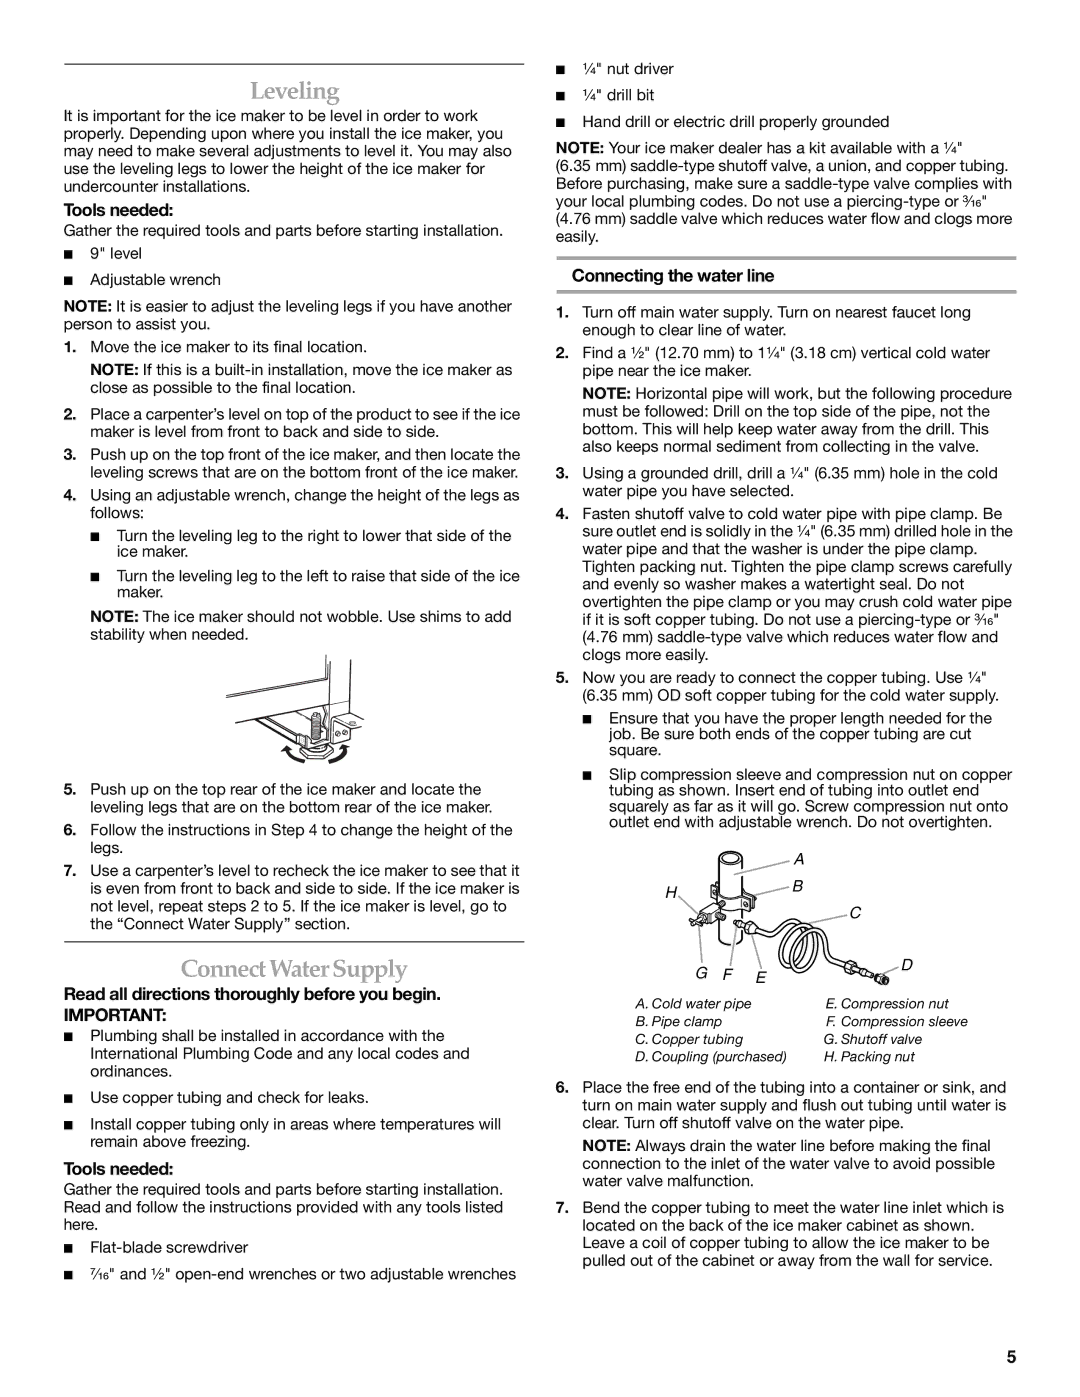 KitchenAid 2313684A manual Leveling, ConnectWater Supply, Tools needed, Connecting the water line 